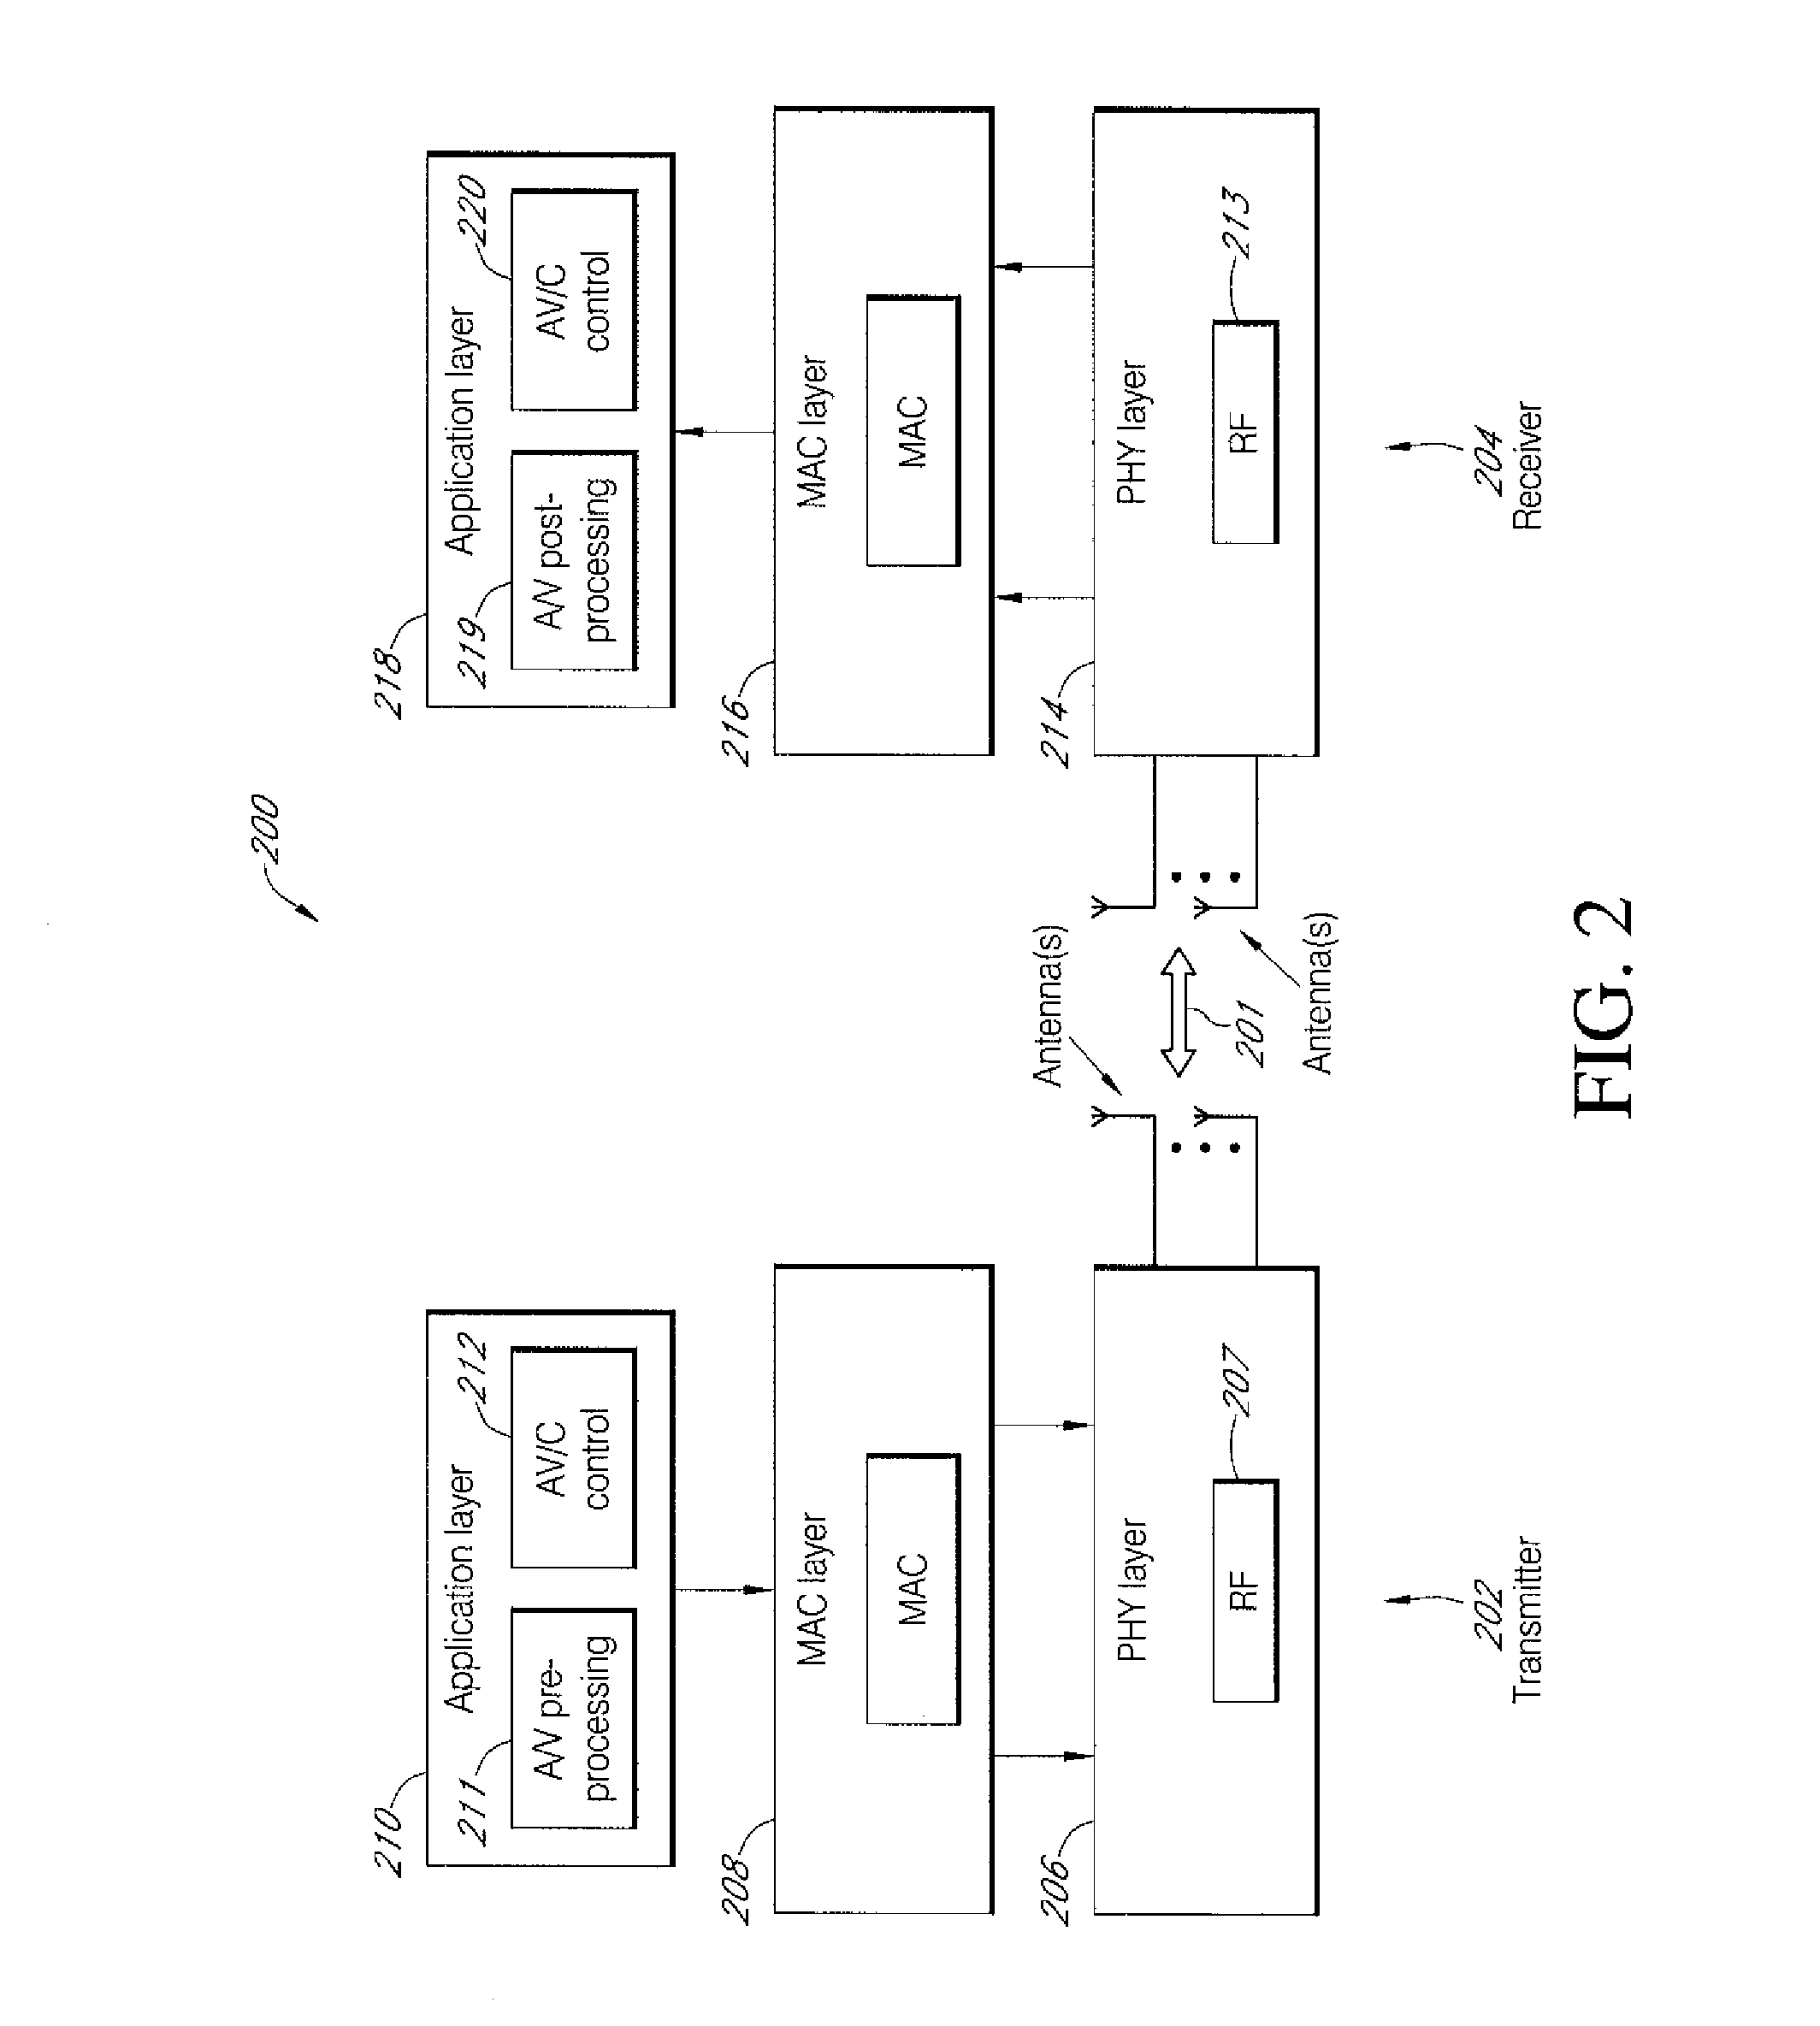 System and method for wireless communication network having proximity control based on authorization token